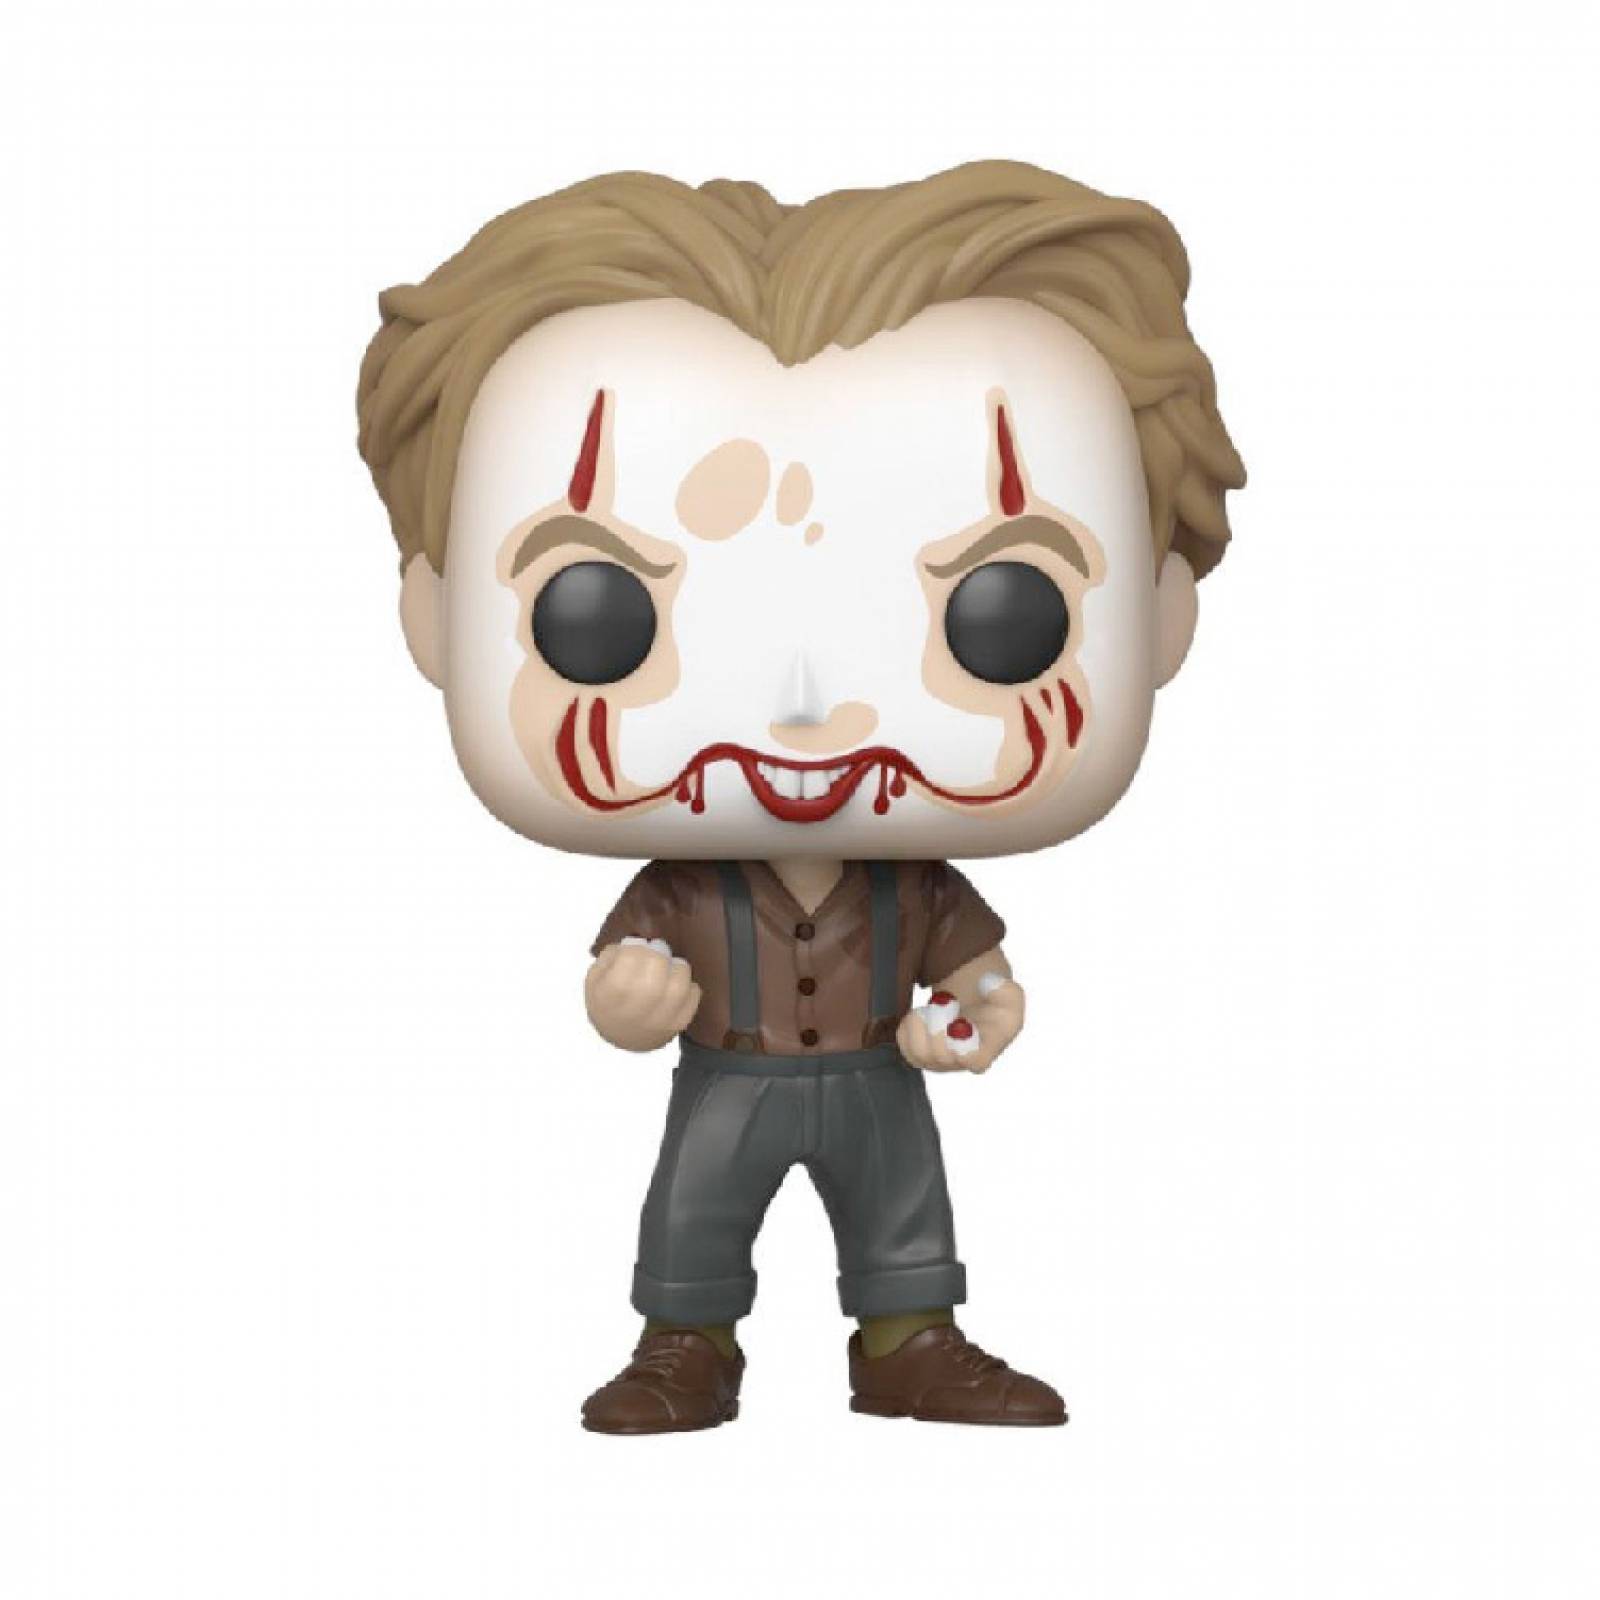 Funko Pop Pennywise Meltdown It Chapter 2